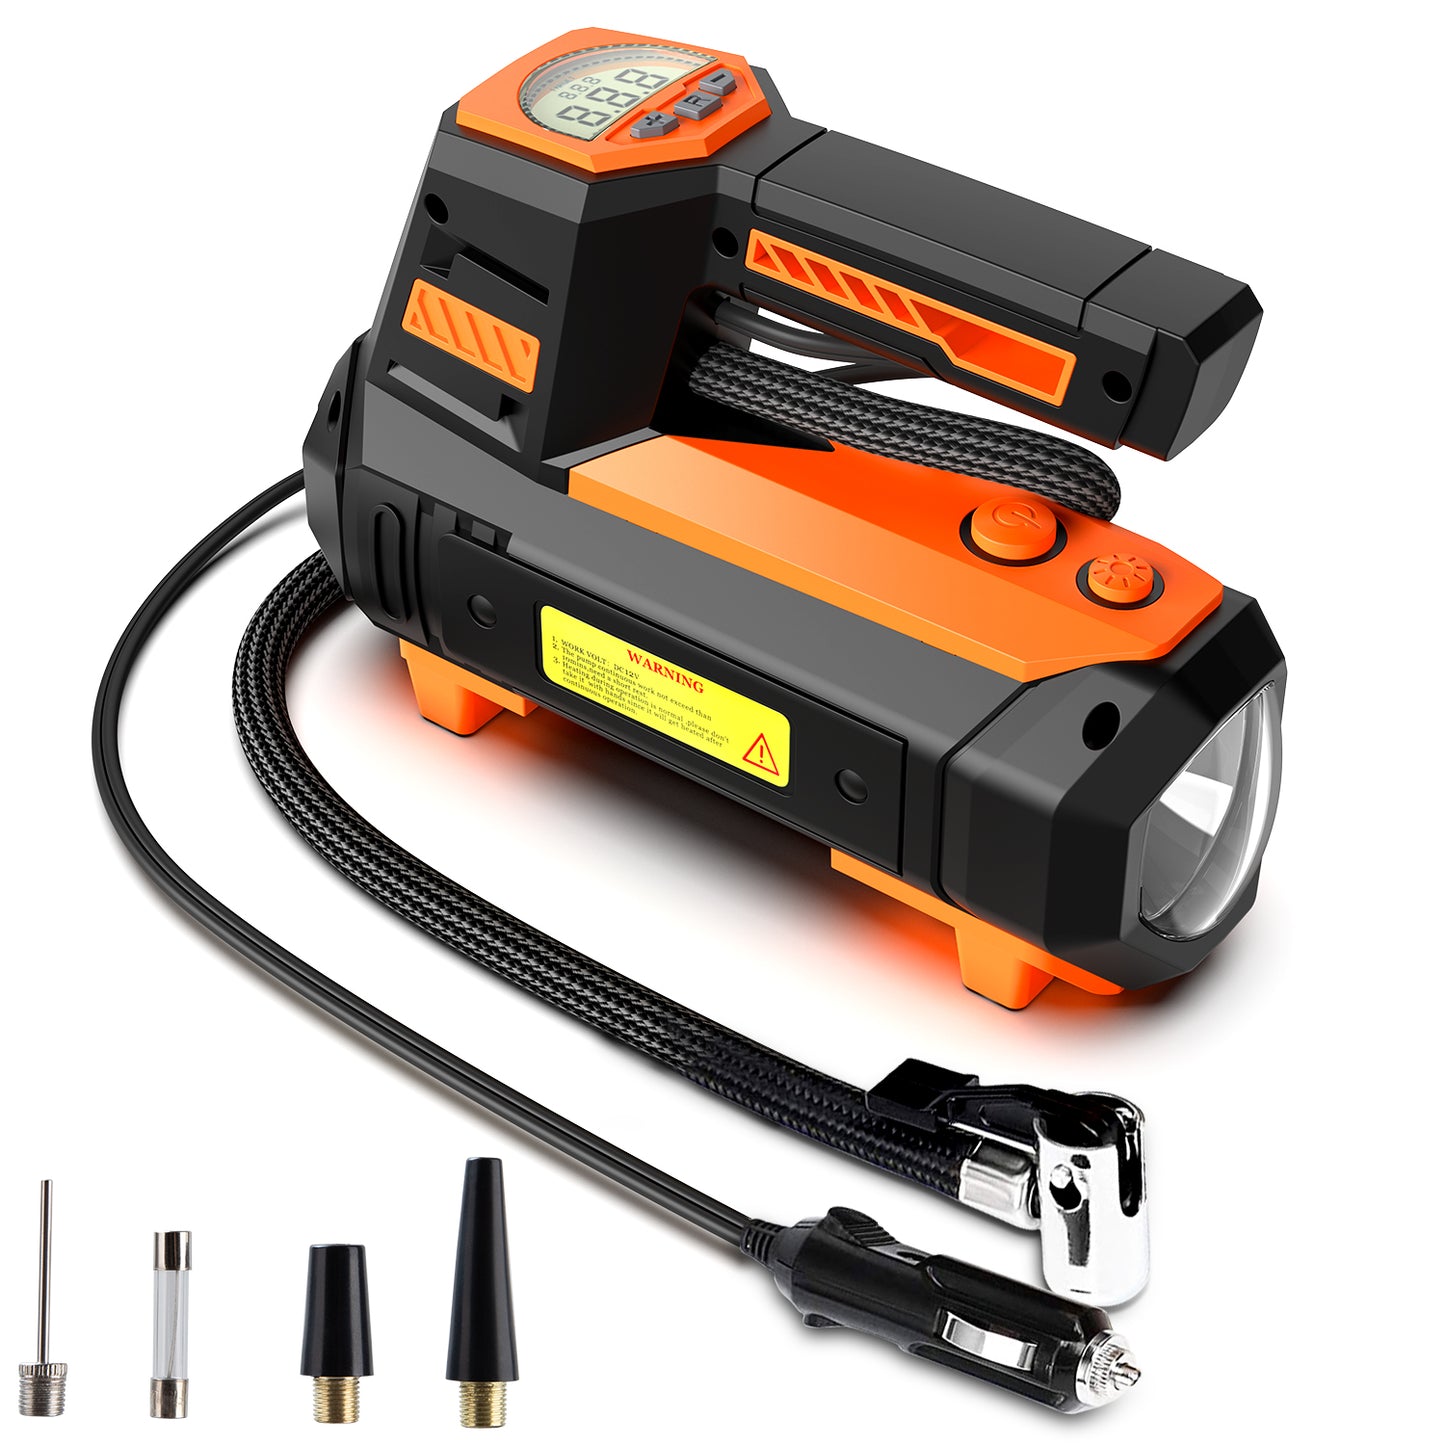 Portable Tire Inflator 12V, Portable DC Air Compressor for Car Tires, Mini Car Air Compressors Tool with LED Light, Digital Air Pump for Car Tires, Bicycles and Other Inflatables, Orange